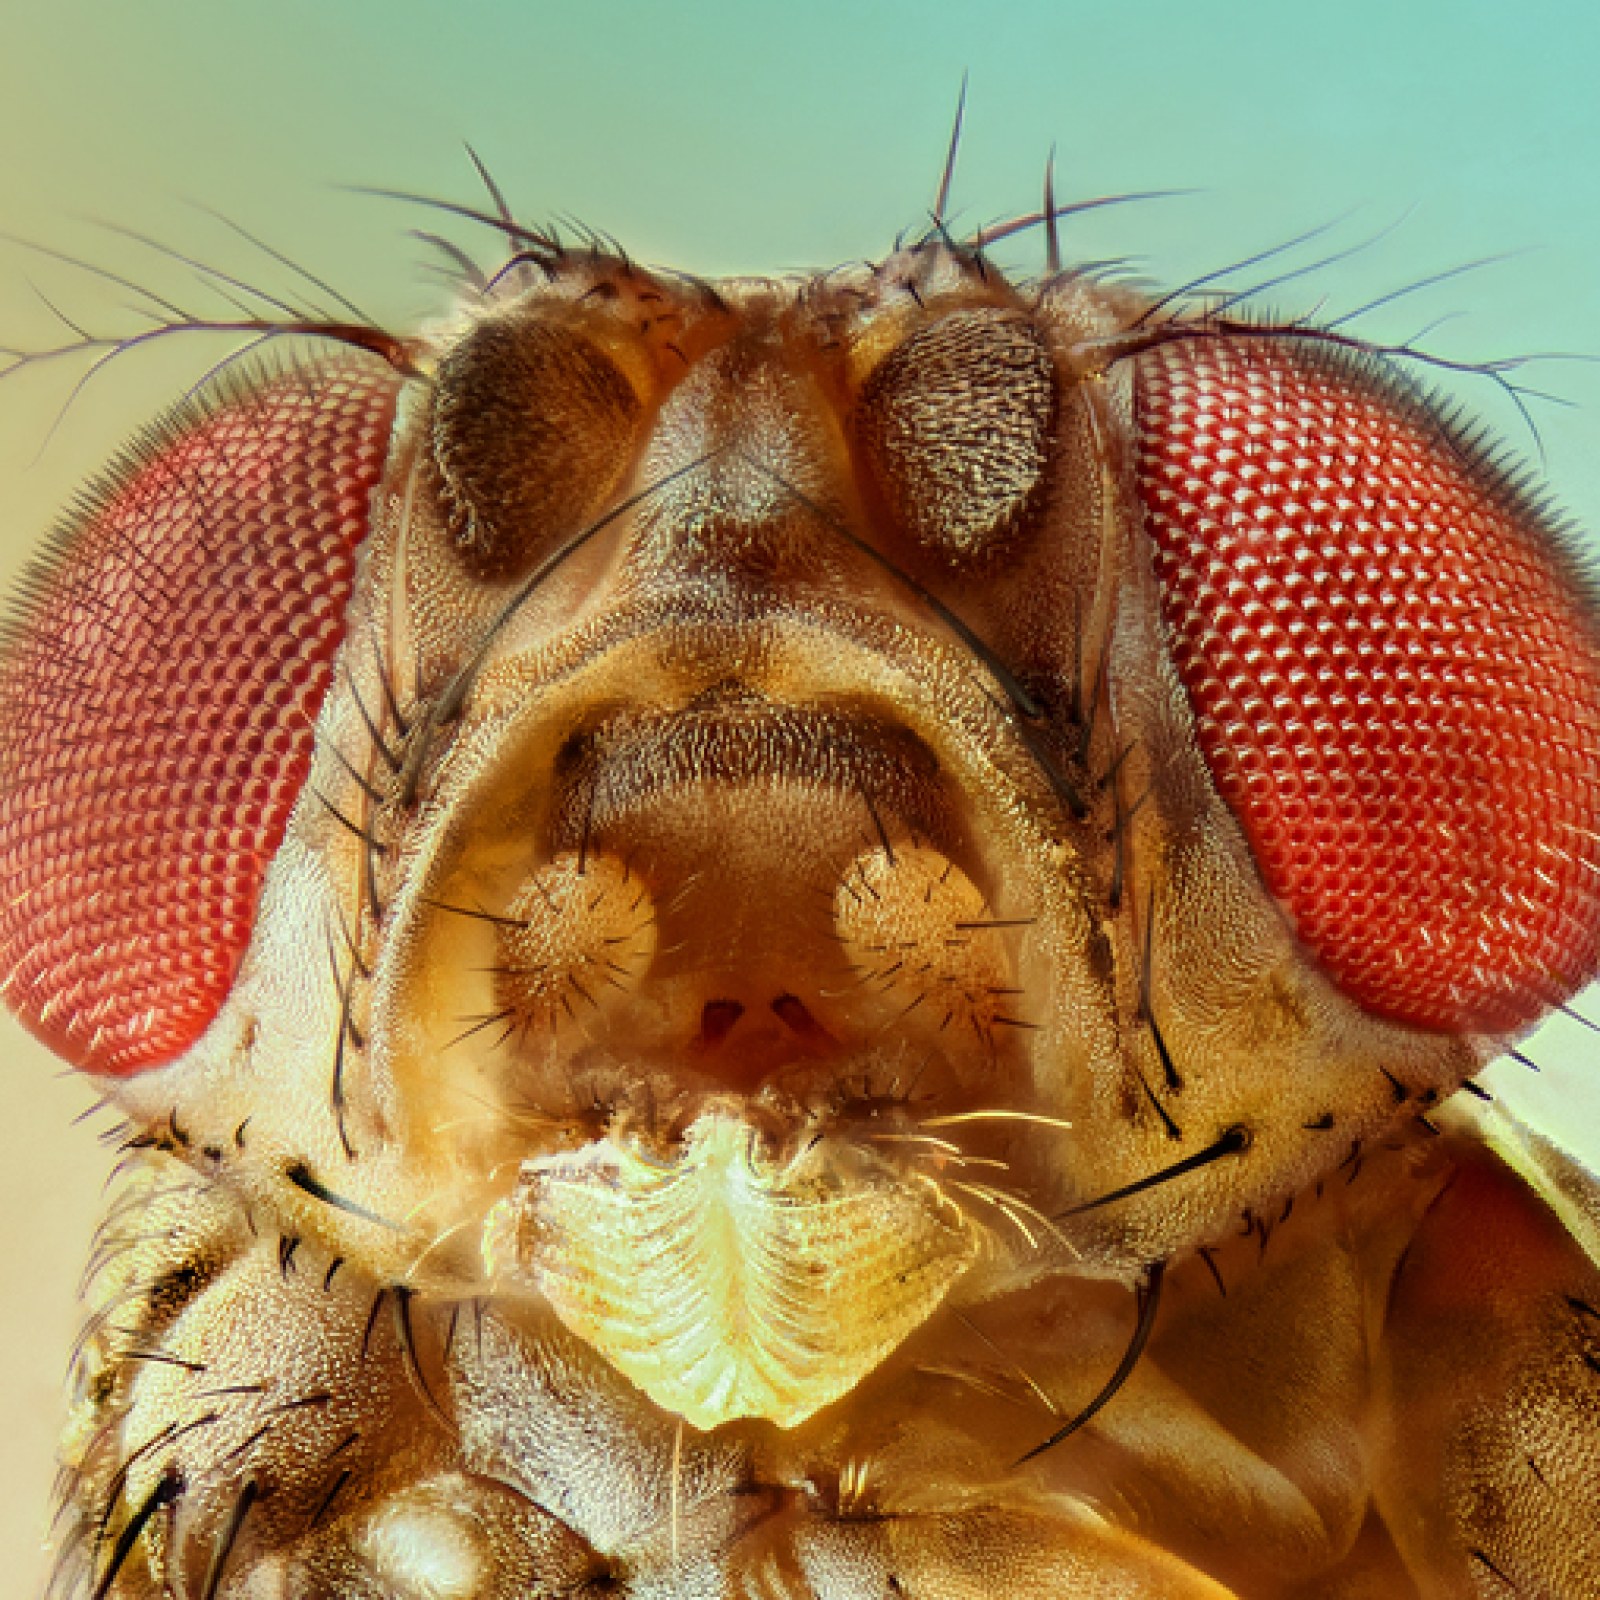 What Insects Can Feel Pain? 